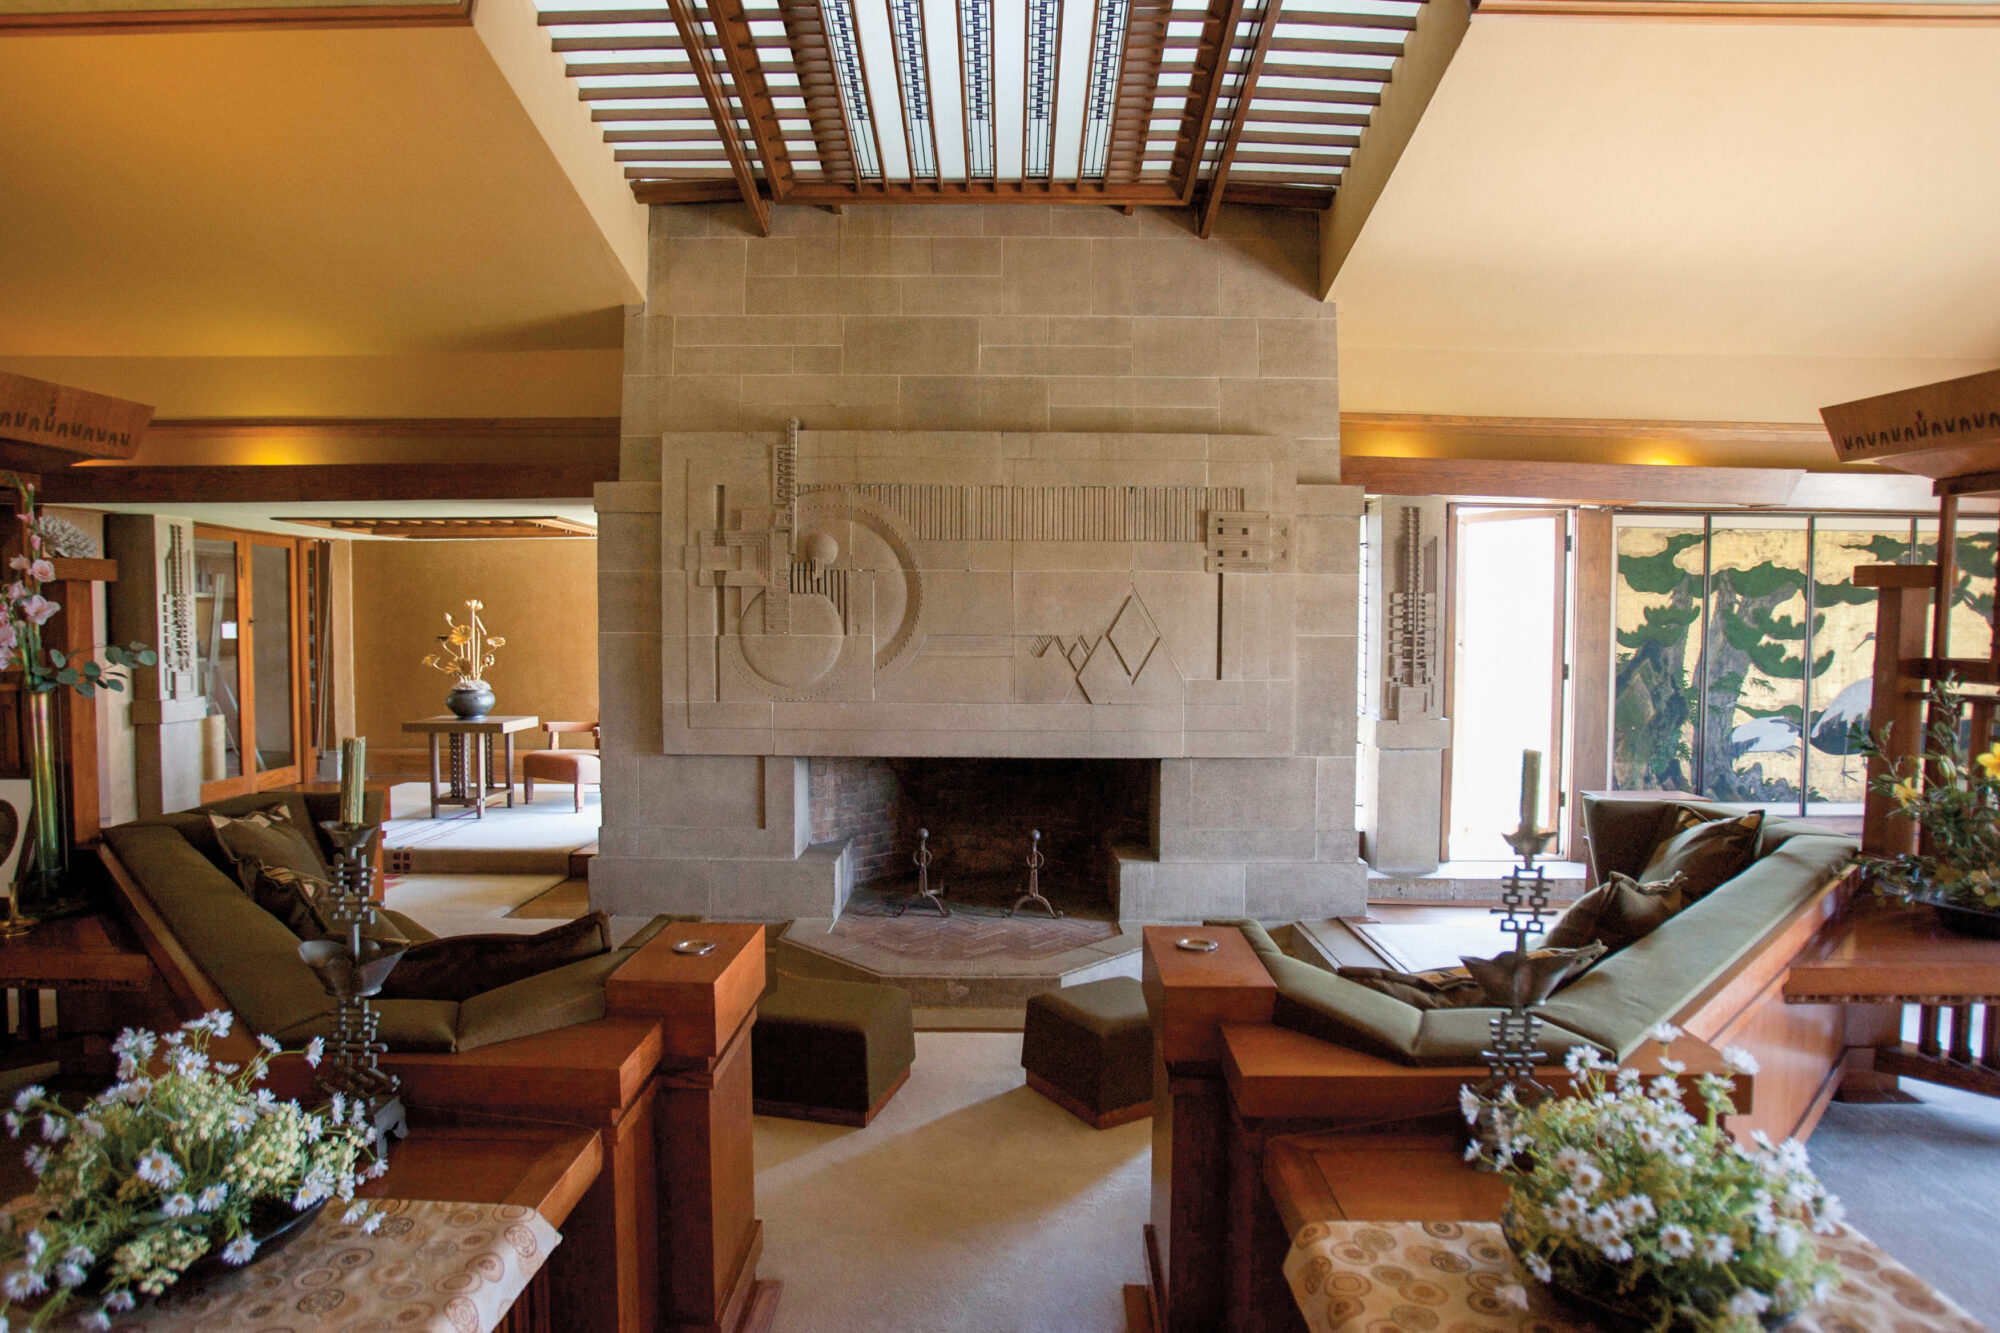 Frank Lloyd Wright's Hollyhock House's living room with seating and fireplace